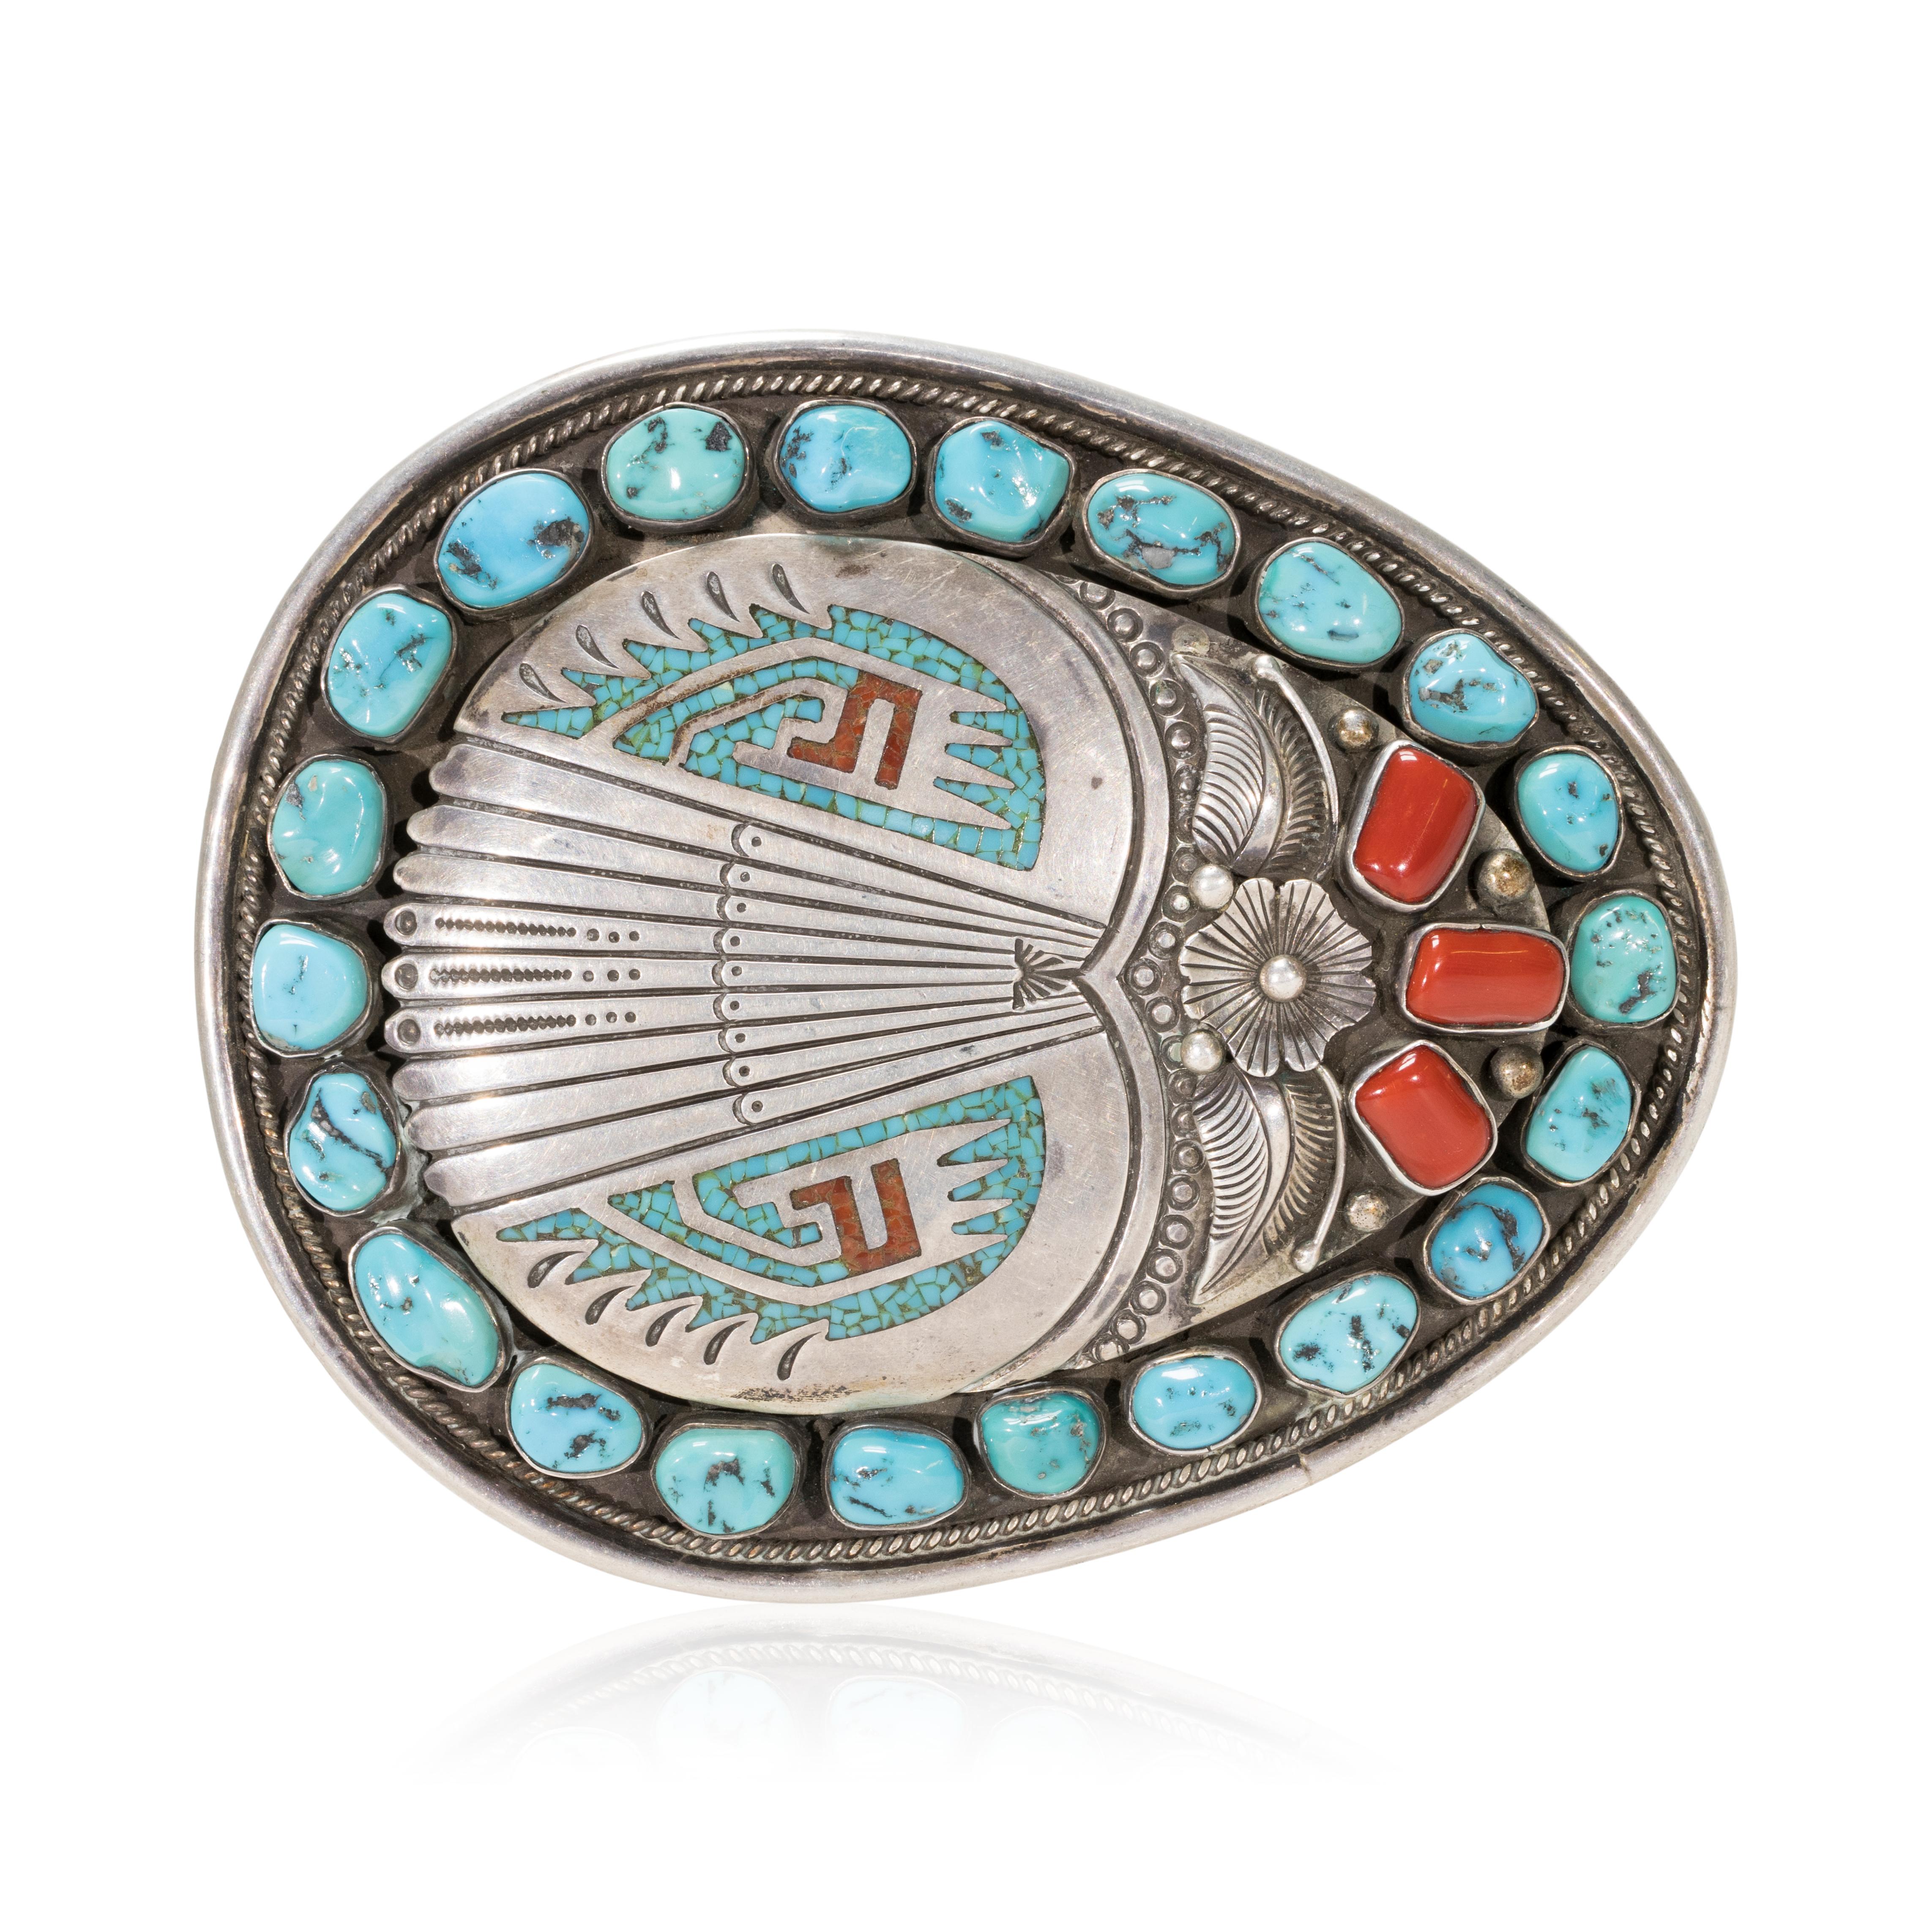 Zuni Sleeping Beauty turquoise and dark red coral buckle. Nuggets surrounded by twisted rop border with stylized thunderbird with wings and tail feathers. Maker's mark 